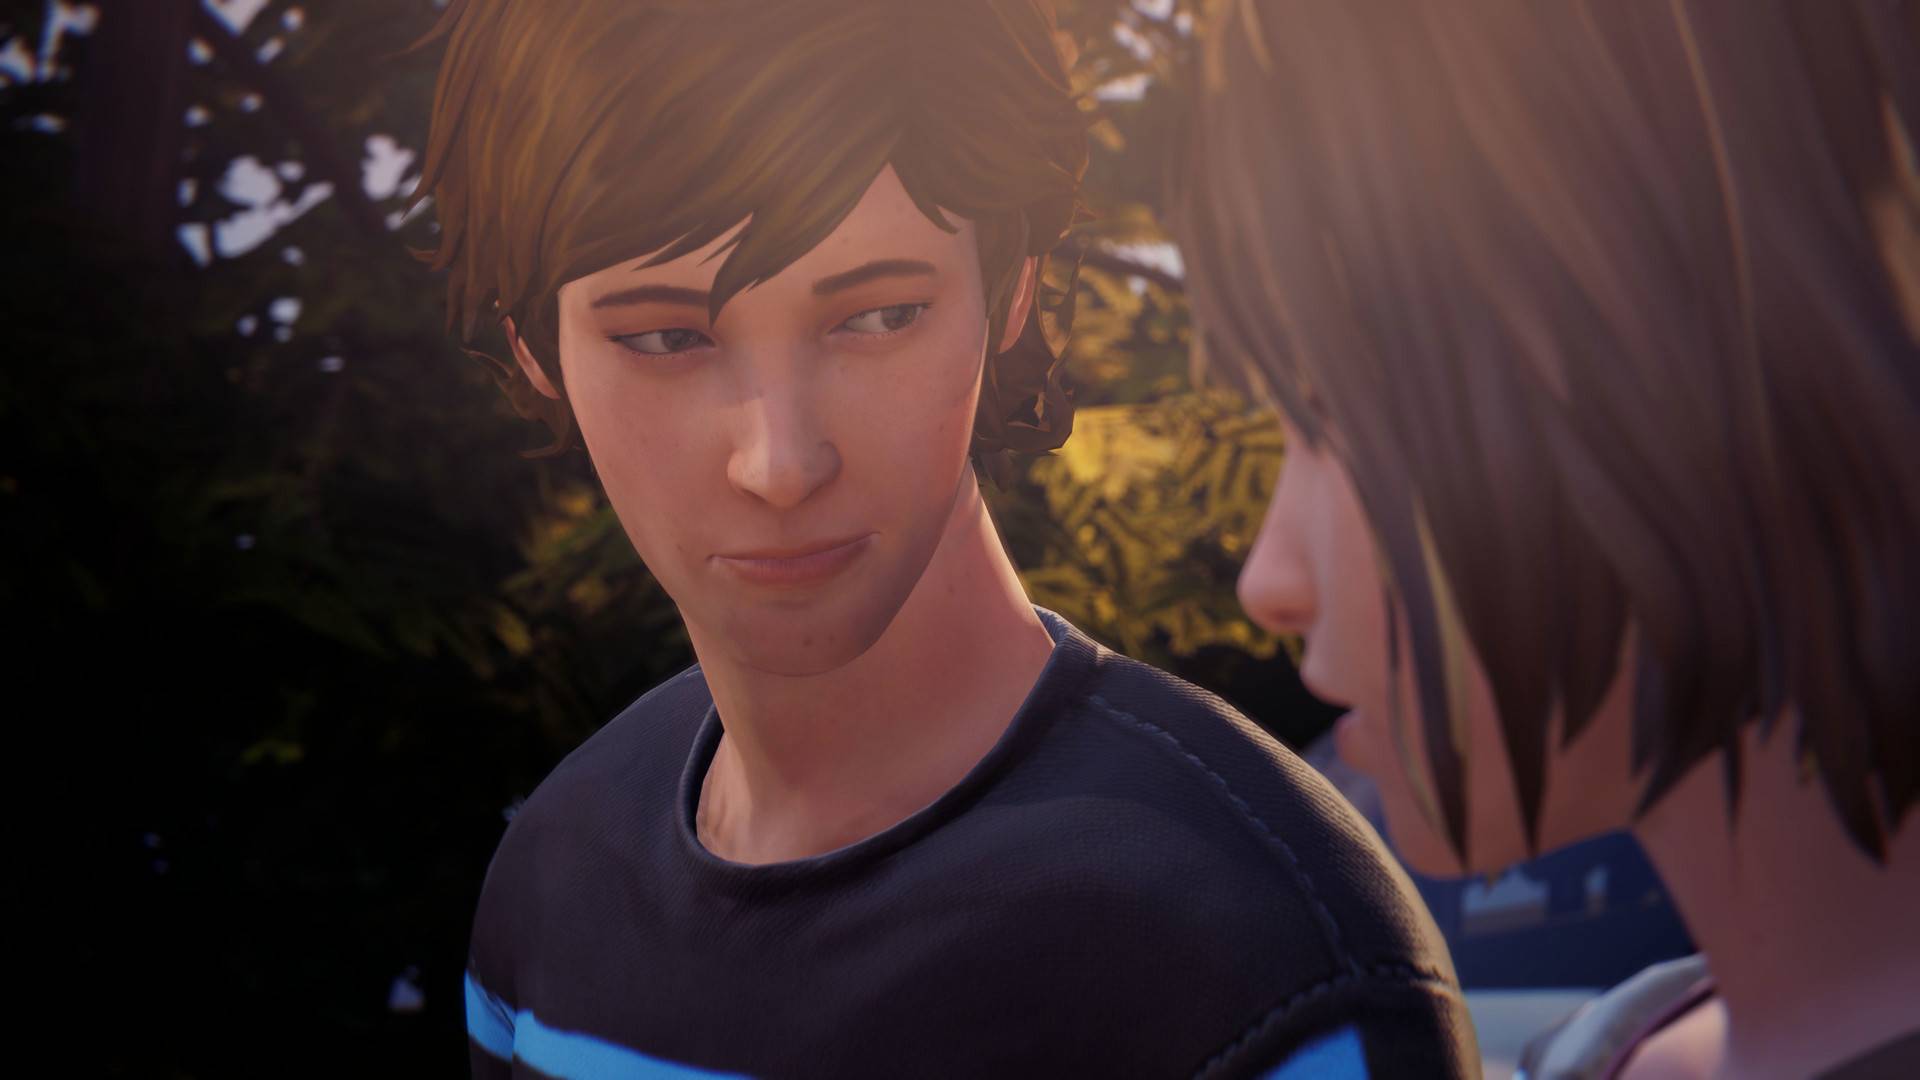 download life is strange new game for free